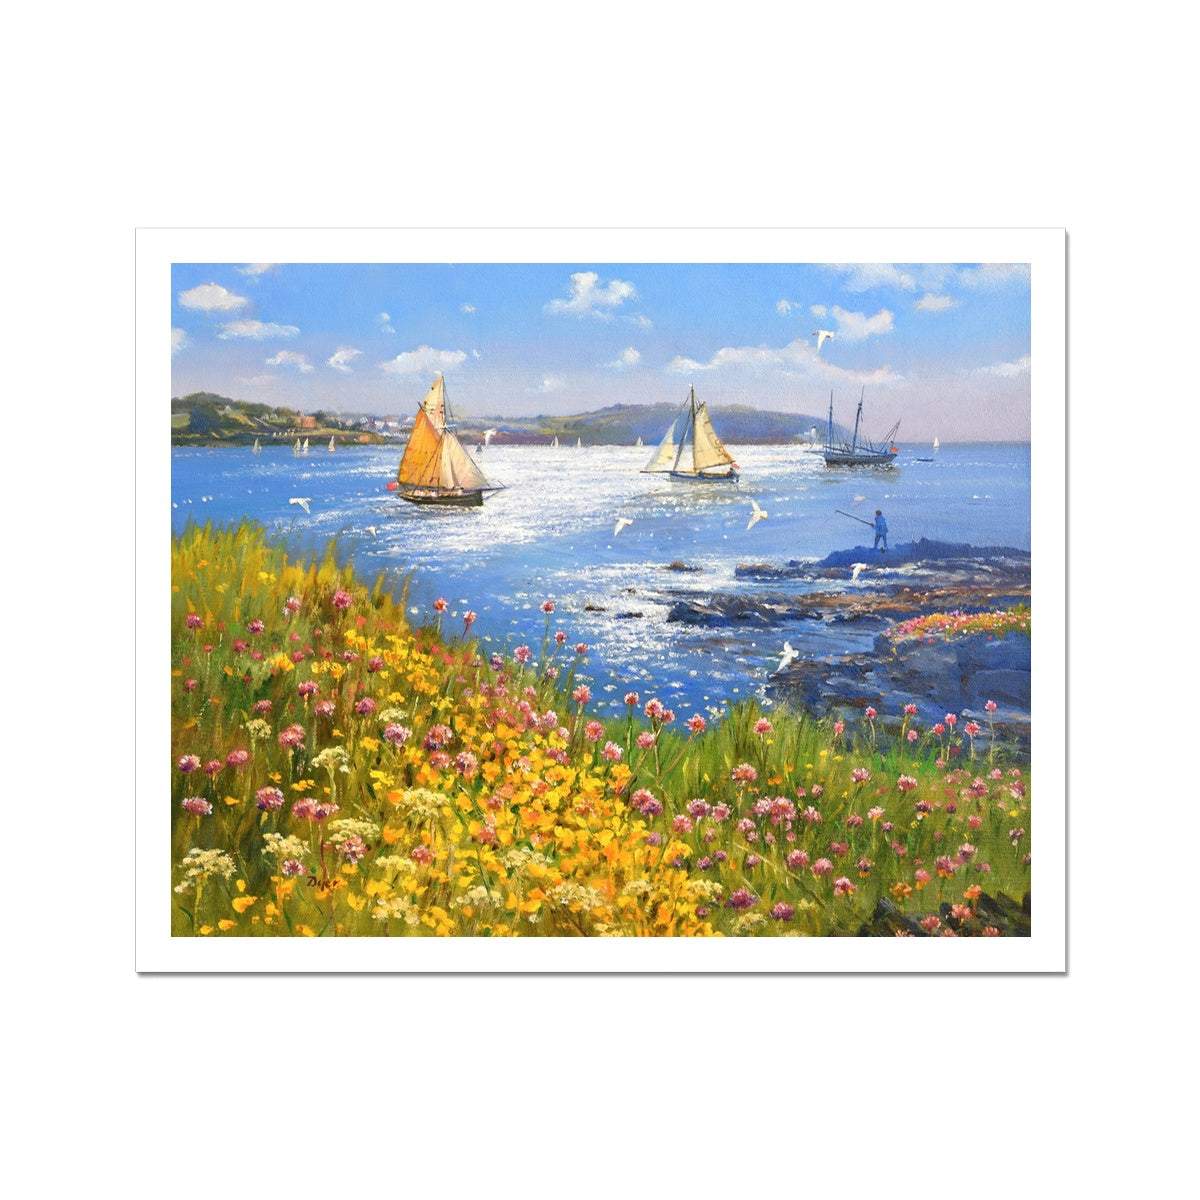 Ted Dyer Fine Art Print. Open Edition Cornish Art Print. 'Sparkling Sea and wild Flowers, Pendennis Headland, Falmouth'. Cornwall Art Gallery